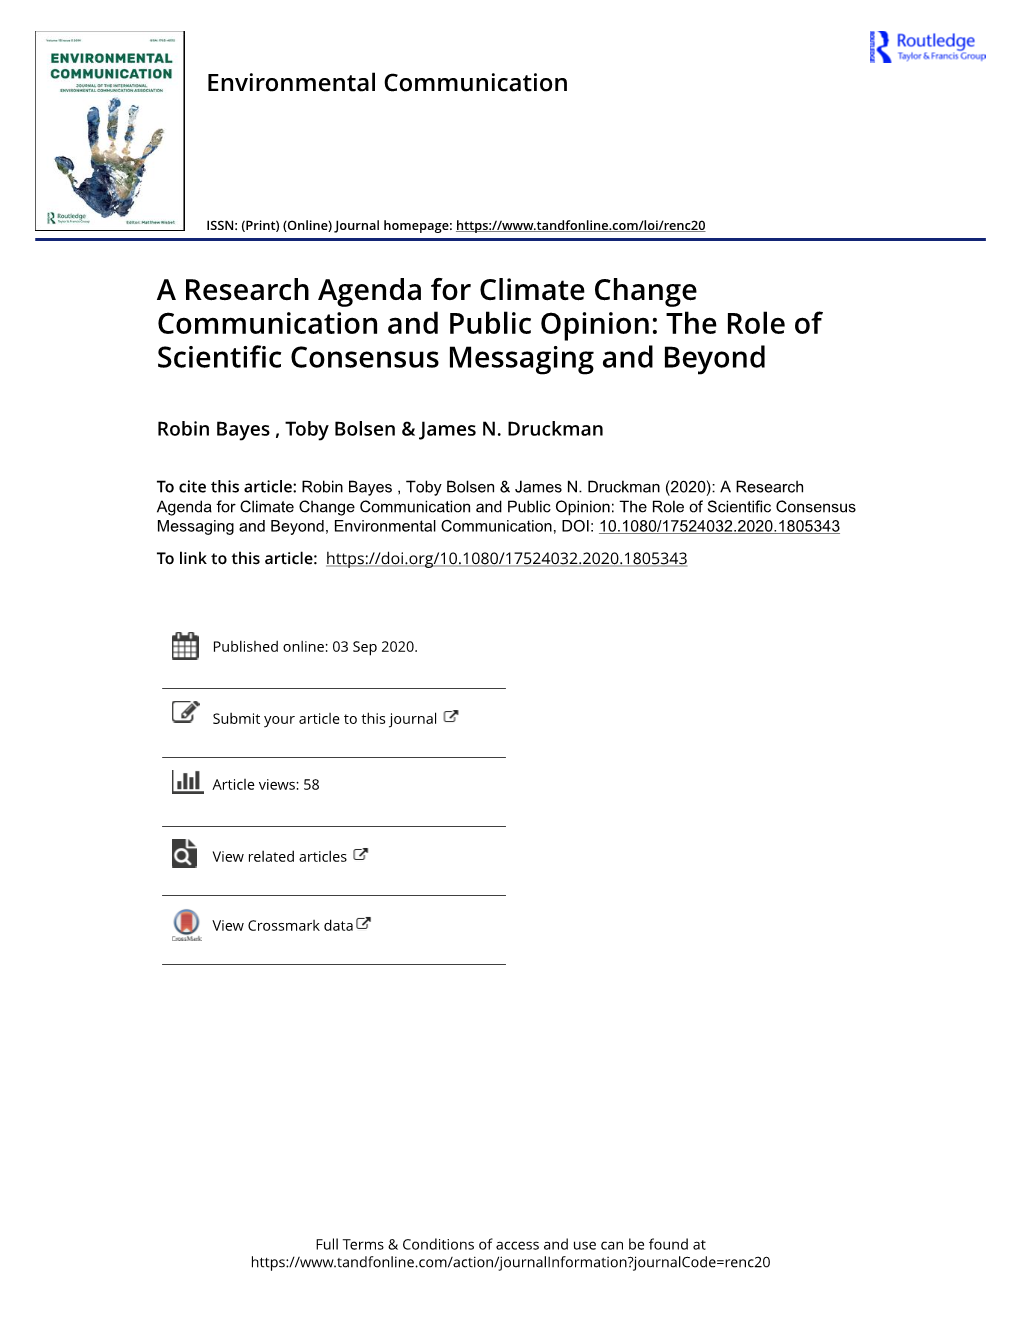 A Research Agenda for Climate Change Communication and Public Opinion: the Role of Scientific Consensus Messaging and Beyond